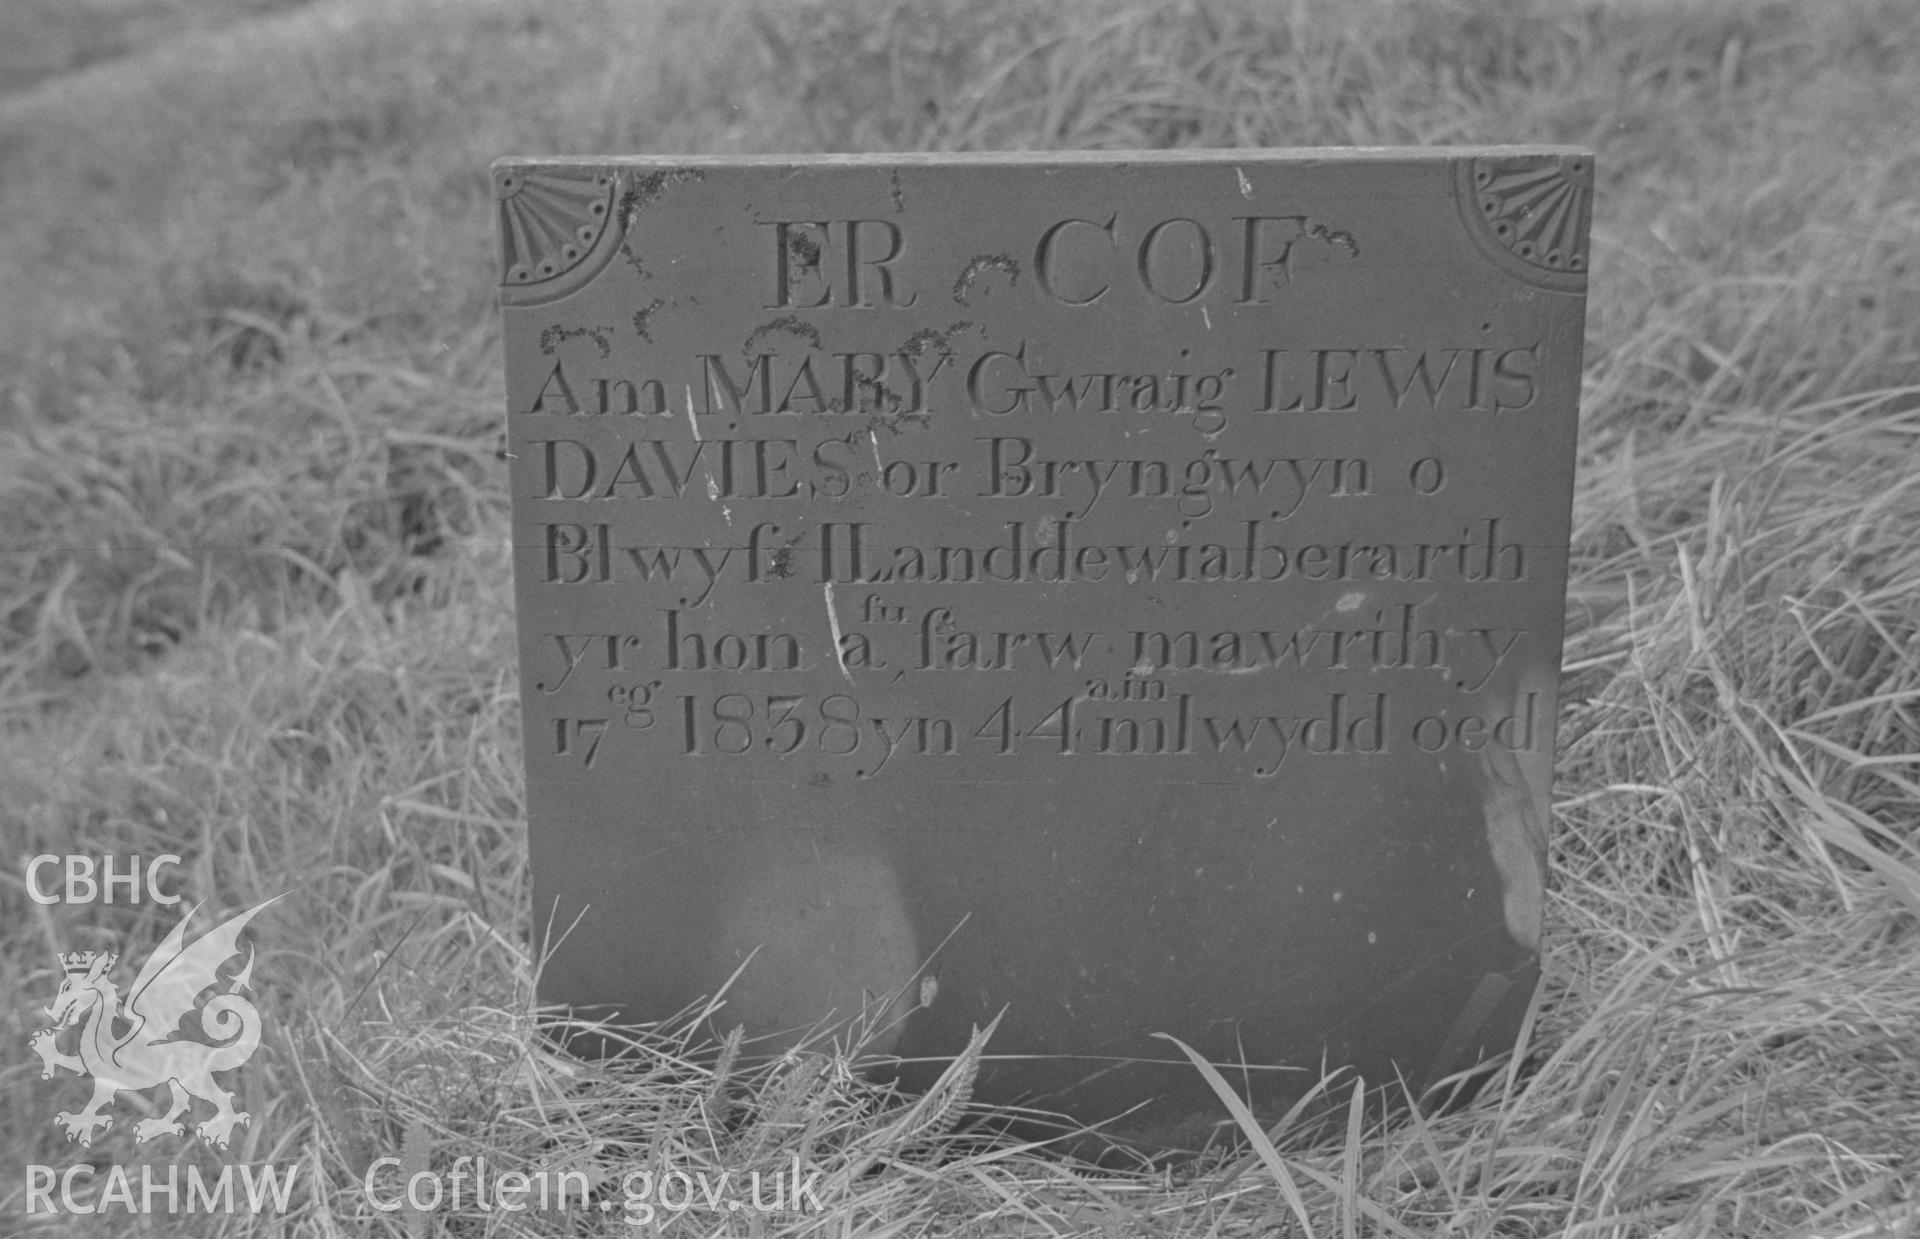 Digital copy of a black and white negative showing 1838 gravestone to the memory of Mary Davies, Bryngwyn, Llanddewiaberarth, at St. David's Church, Henfynyw, Aberaeron. Photographed by Arthur O. Chater on 5th September 1966 from Grid Reference SN 447 613.